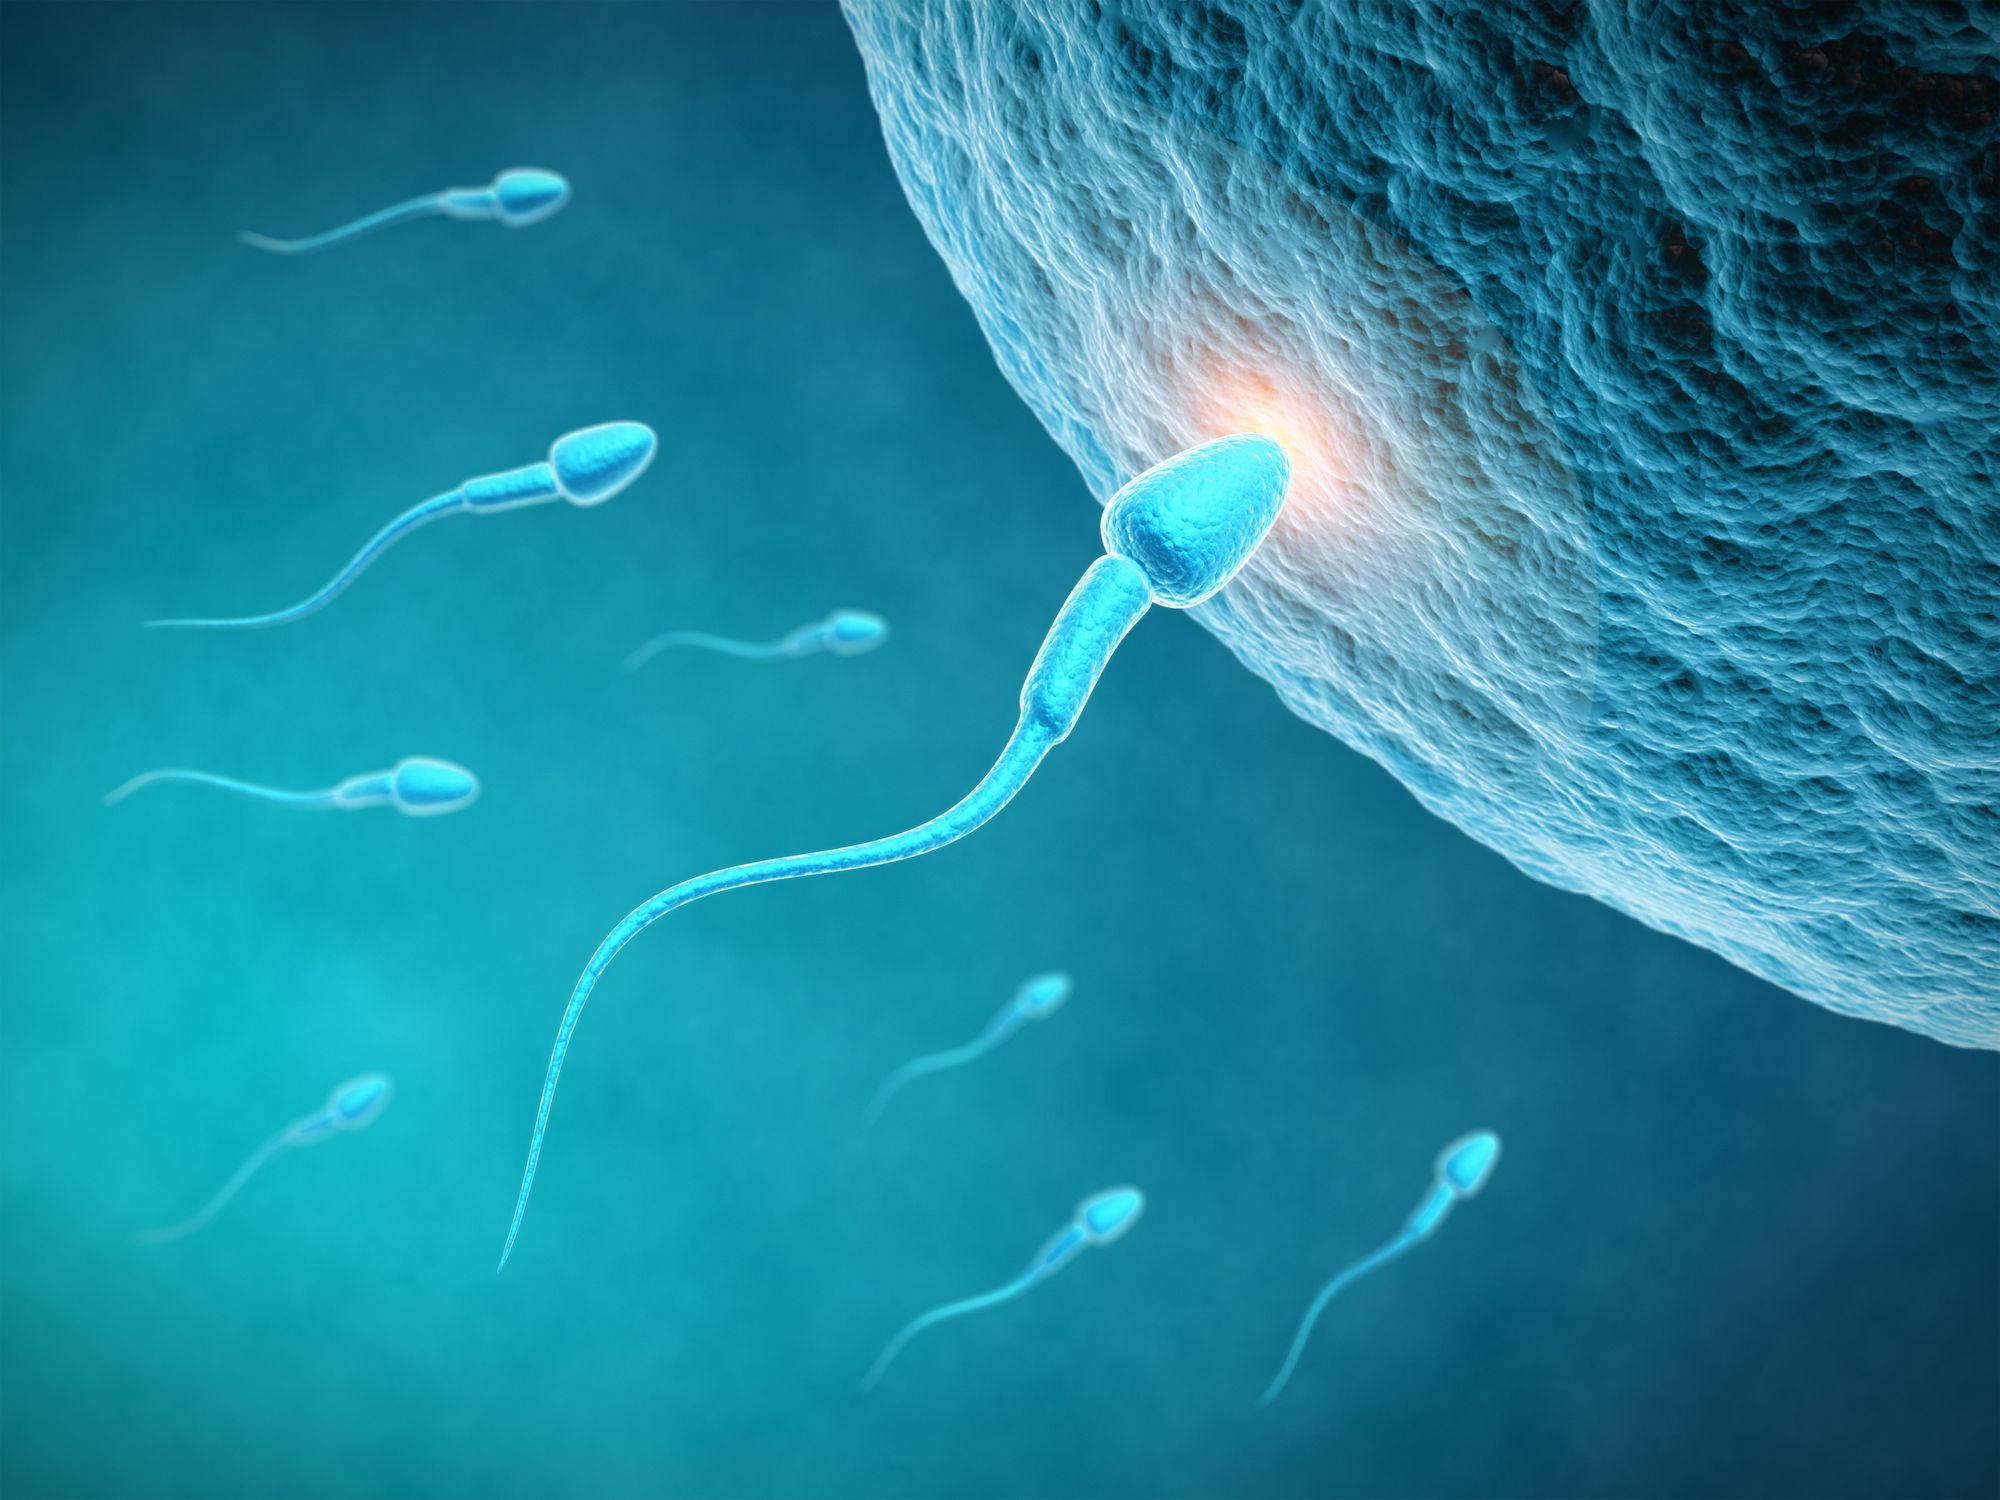 Sperm counts and initial sperm storage in d. melanogaster